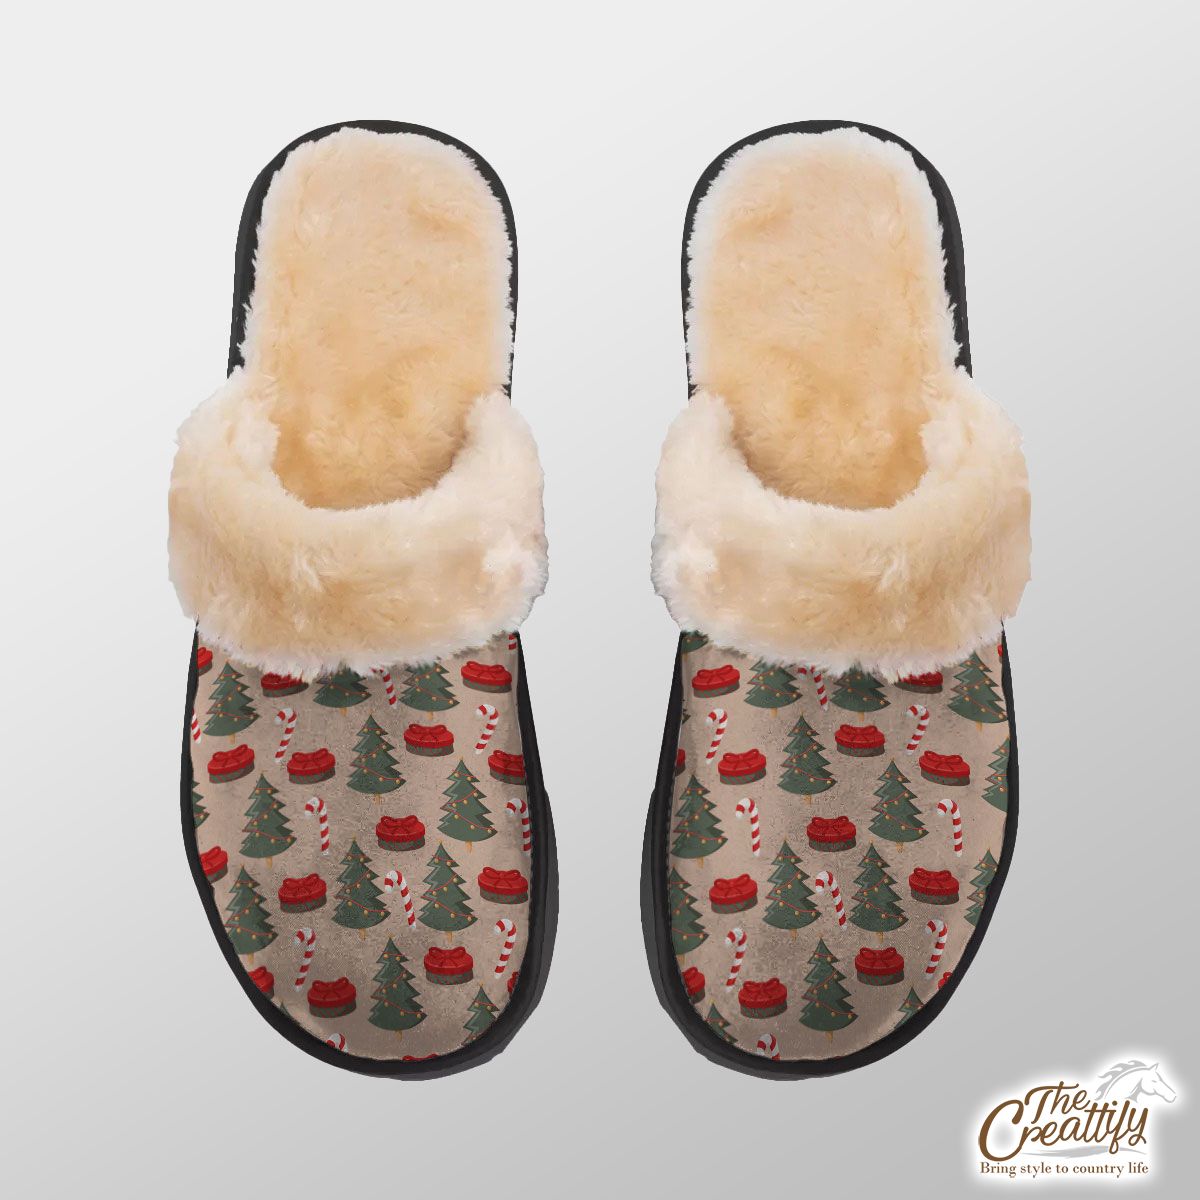 Christmas Tree, Christmas Gift, Candy Cane Home Plush Slippers